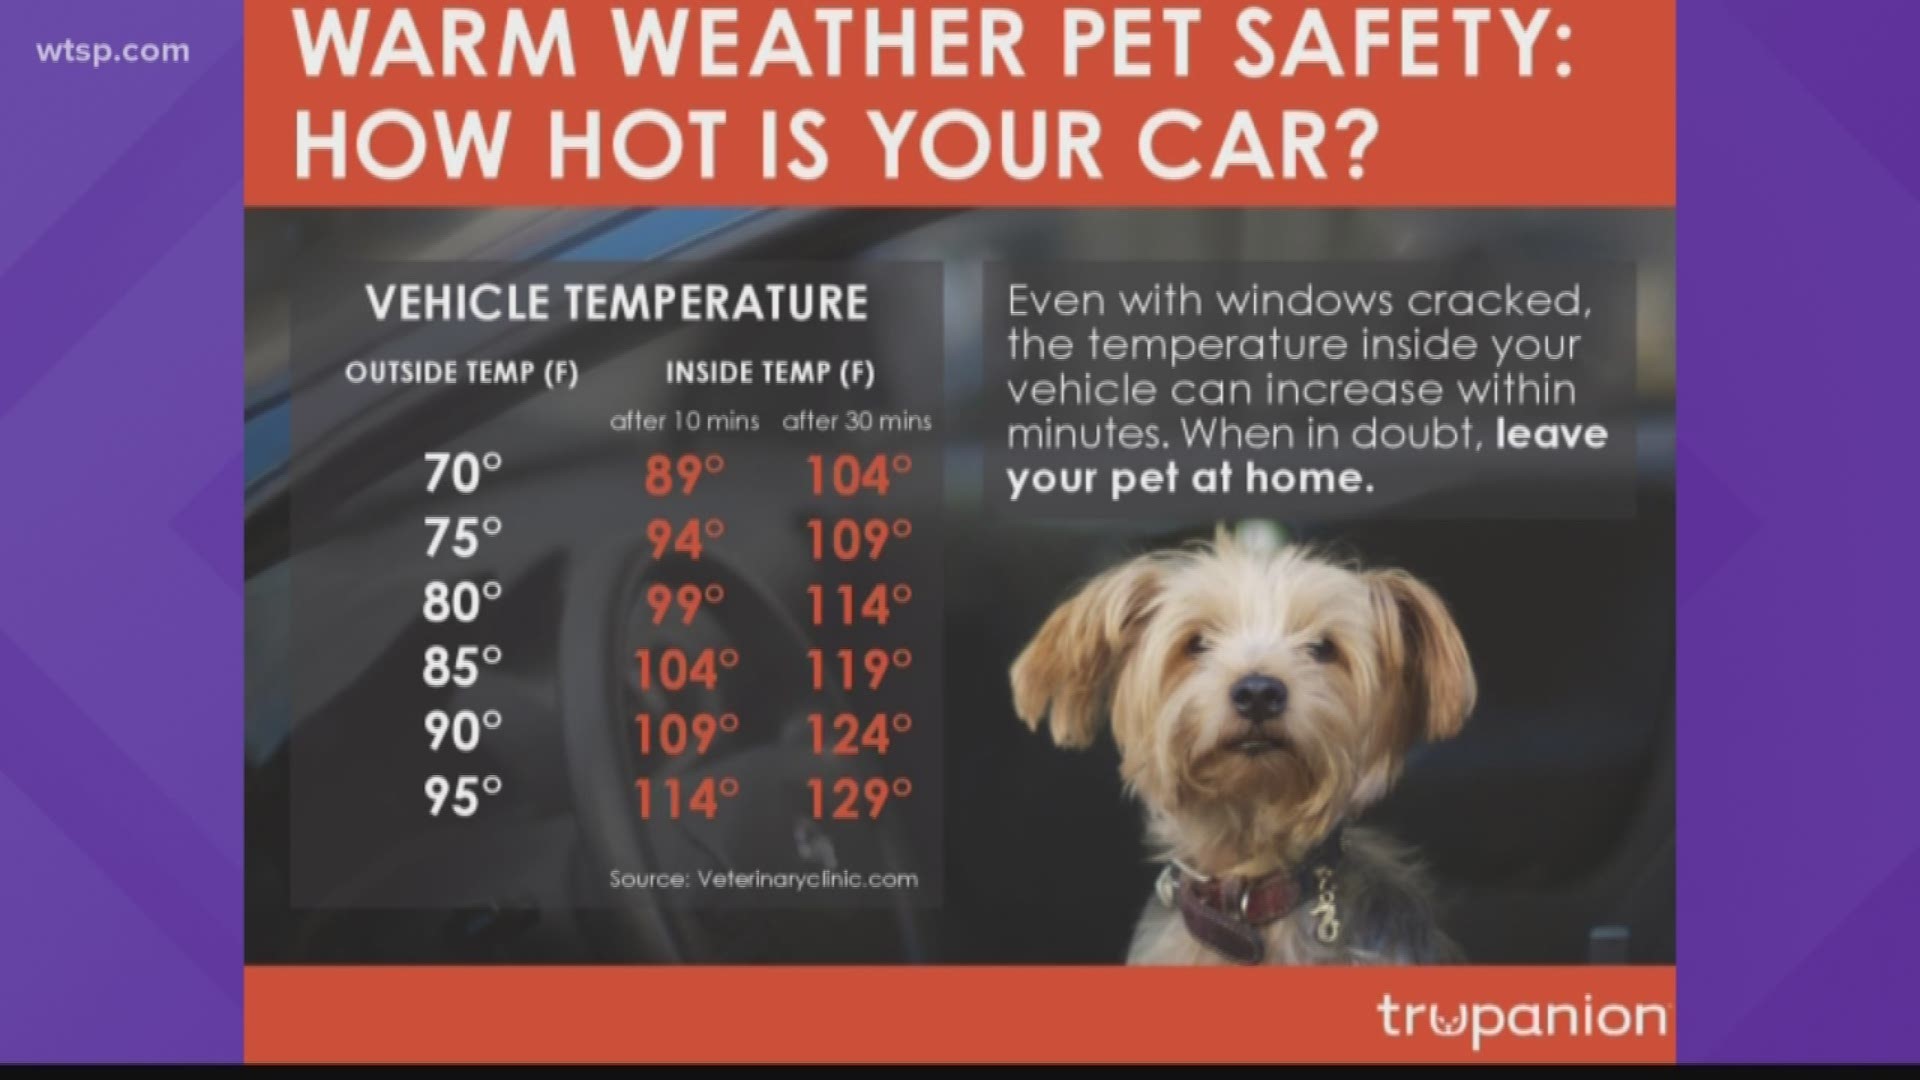 As the temperature climbs, so too does the risk of hot car deaths -- and it's perfectly legal to bust through a window help someone in a desperate situation.

While most people, hopefully, would break through a window at a moment's notice, there are certain criteria to follow to be protected from the law.

According to a 2016 Florida law, someone who enters a car, including by force, can be immune from penalty for saving a person. The law applies to rescuing an animal as well.